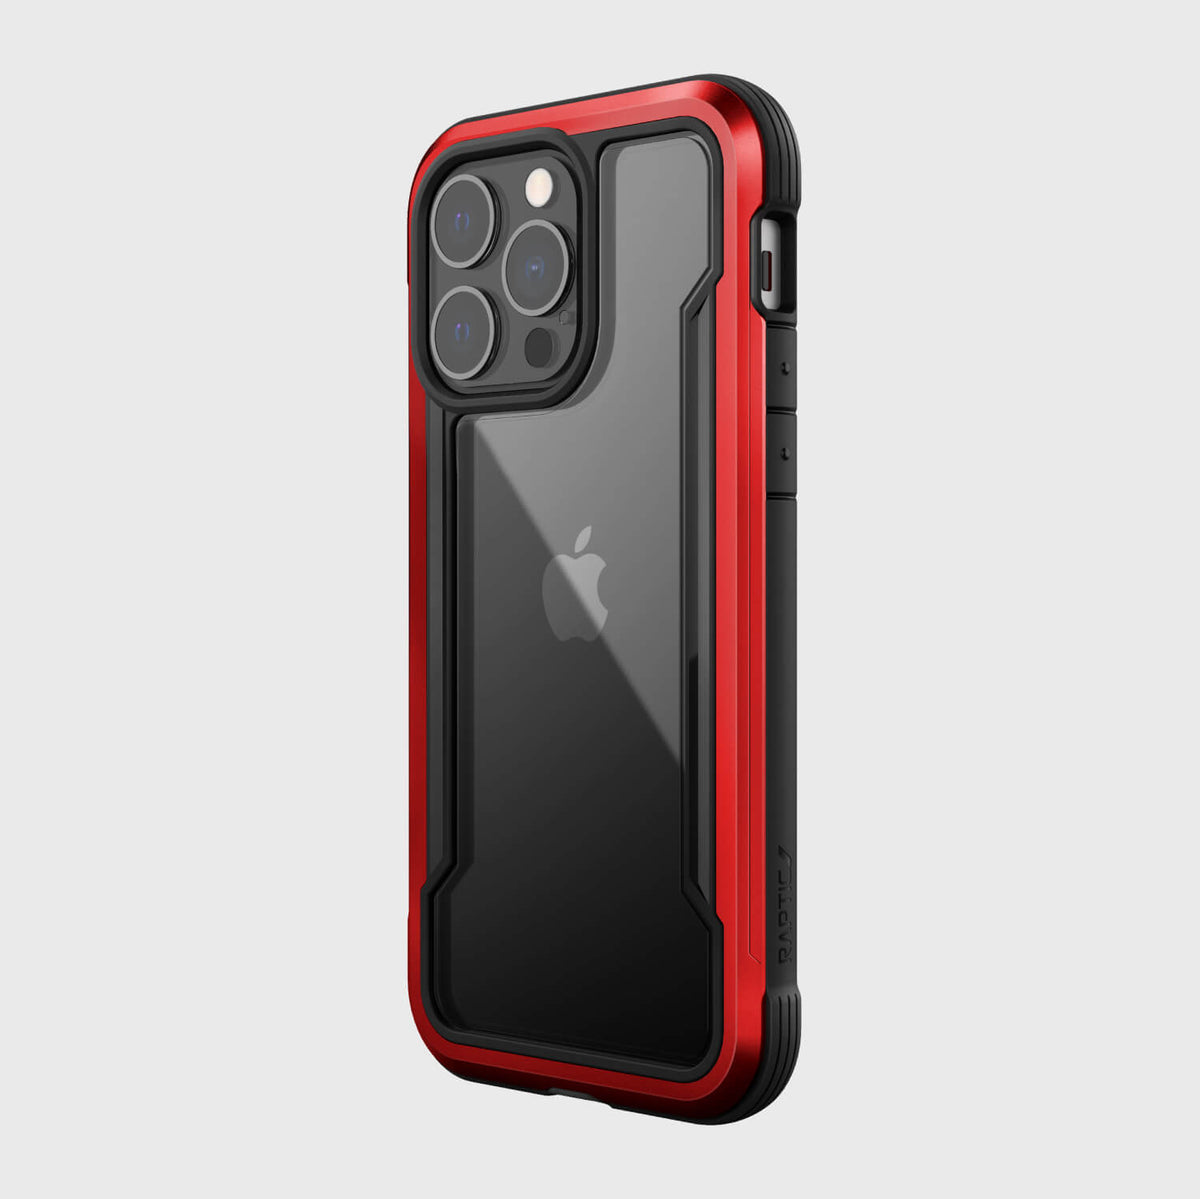 The Raptic Shield Pro case, made specifically for the iPhone 13 Pro, offers drop protection in a stylish red and black design.